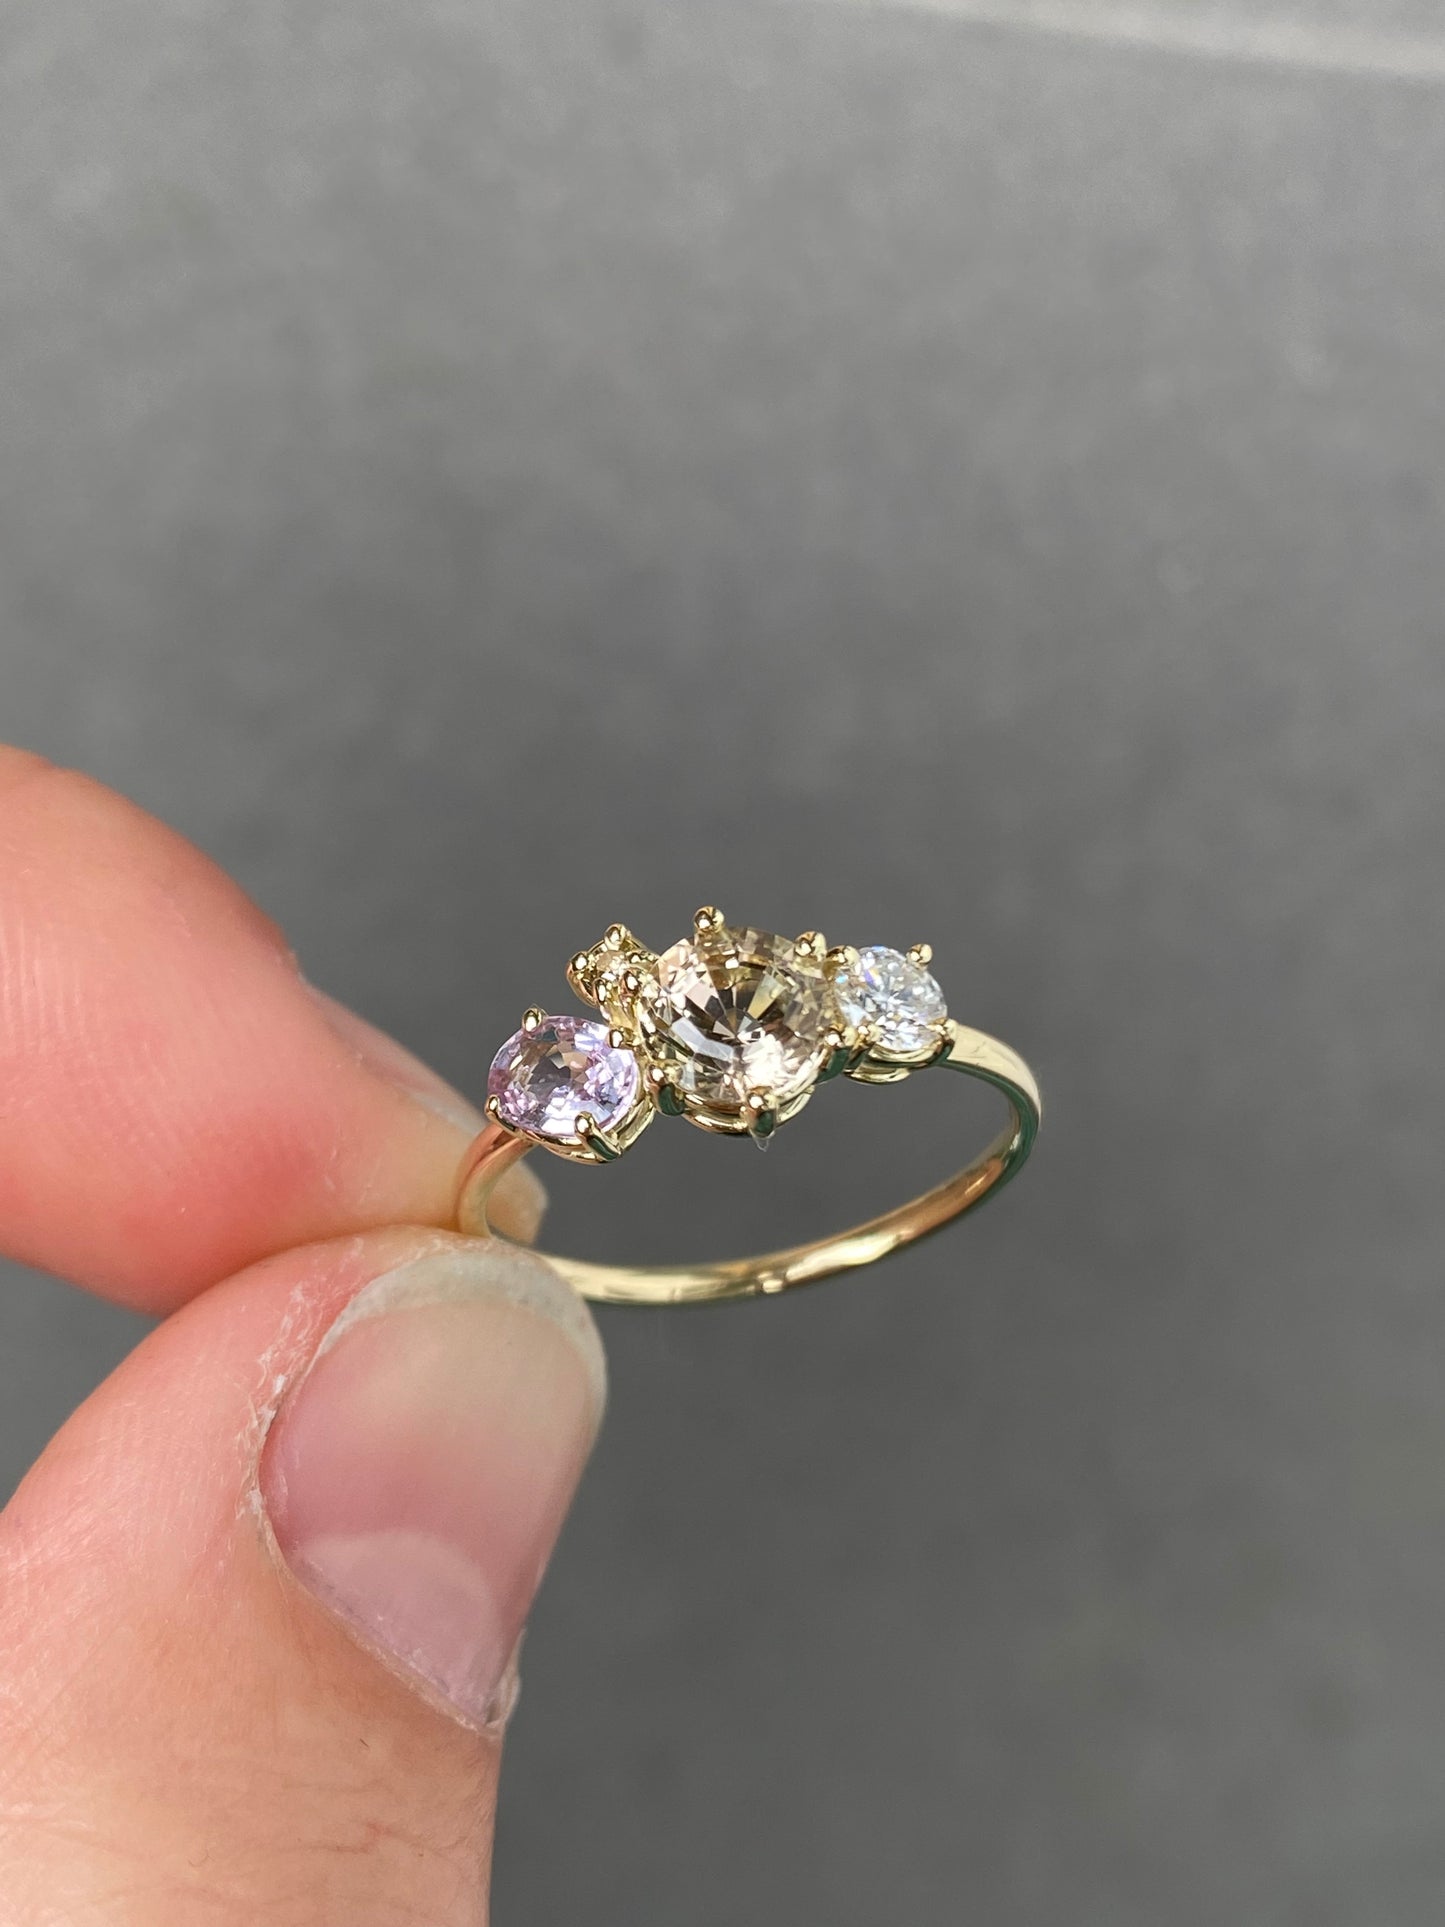 Mosaic ring with Diamond, Tourmaline and Pink sapphire in 14k yellow gold